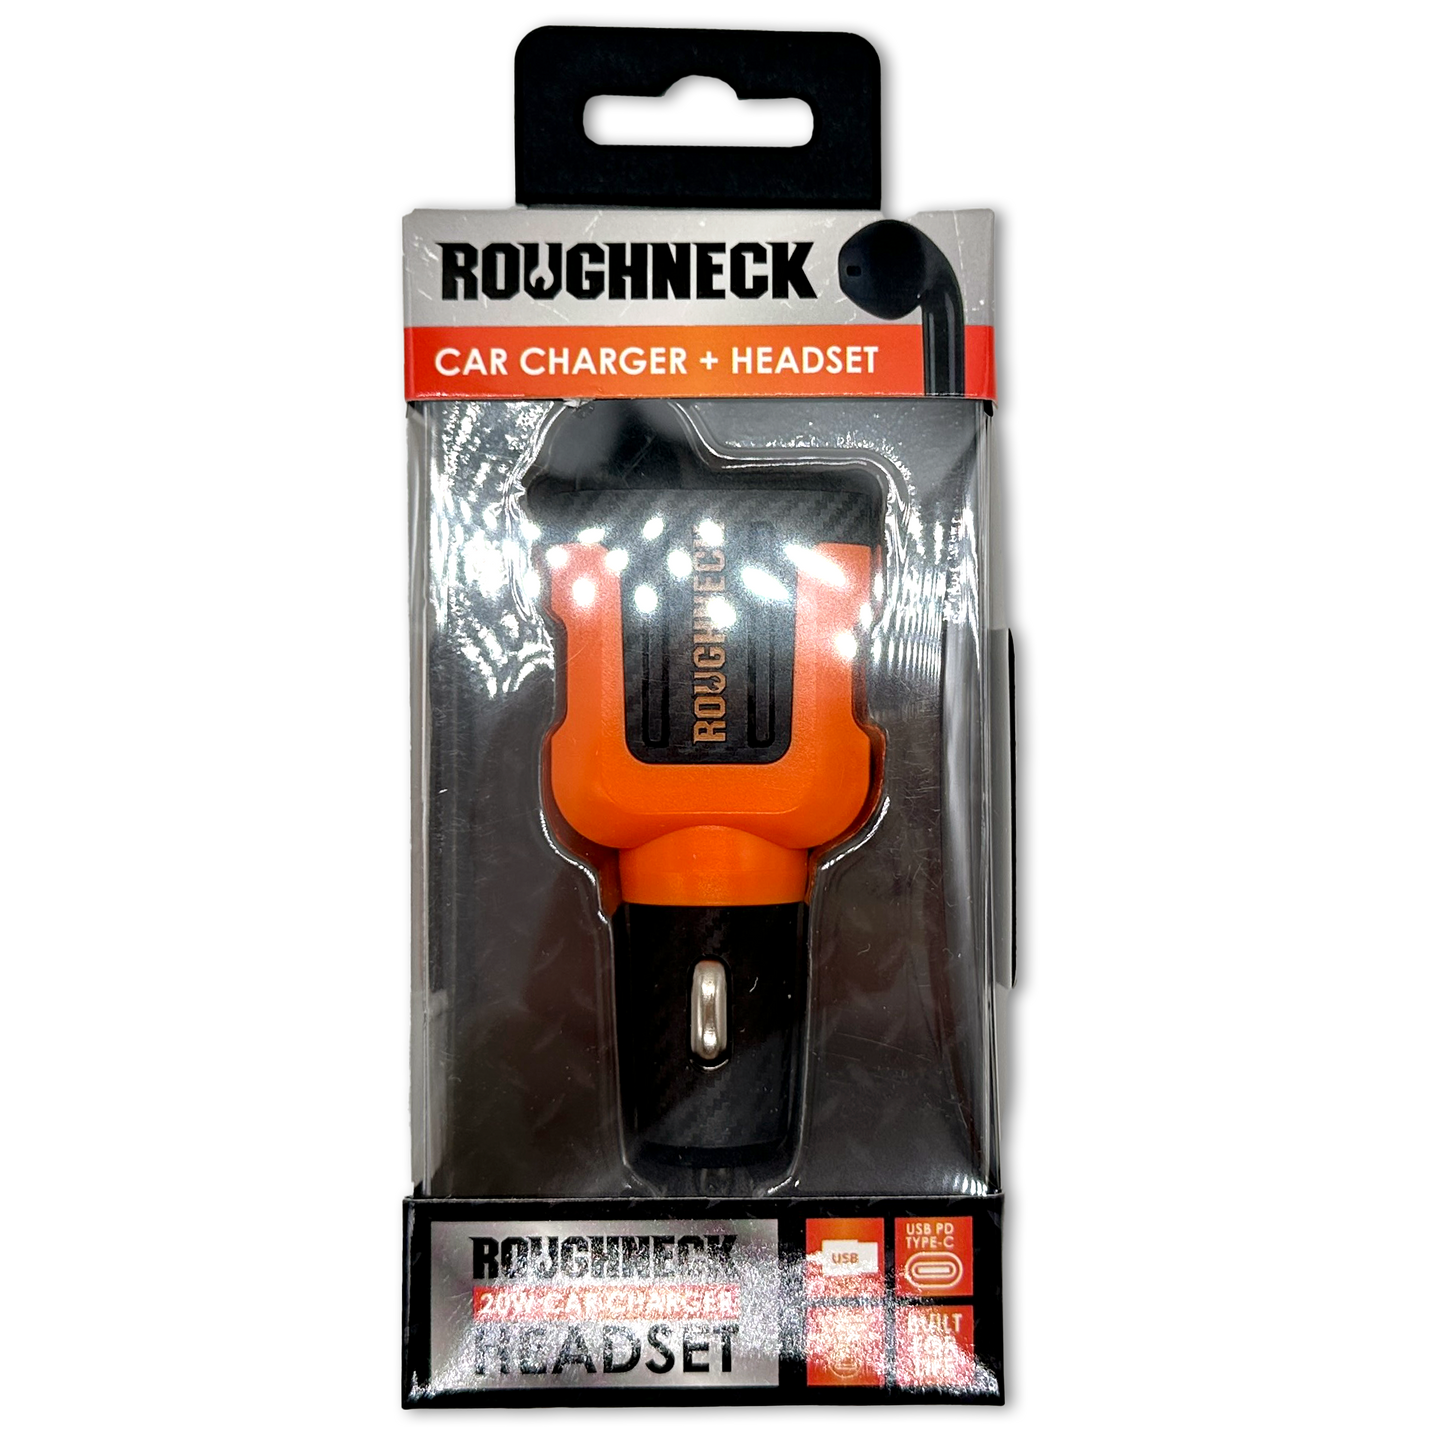 ITEM NUMBER 023690L ROUGHNECK CHARGER + HEADSET - STORE SURPLUS NO DISPLAY 6 PIECES PER PACK